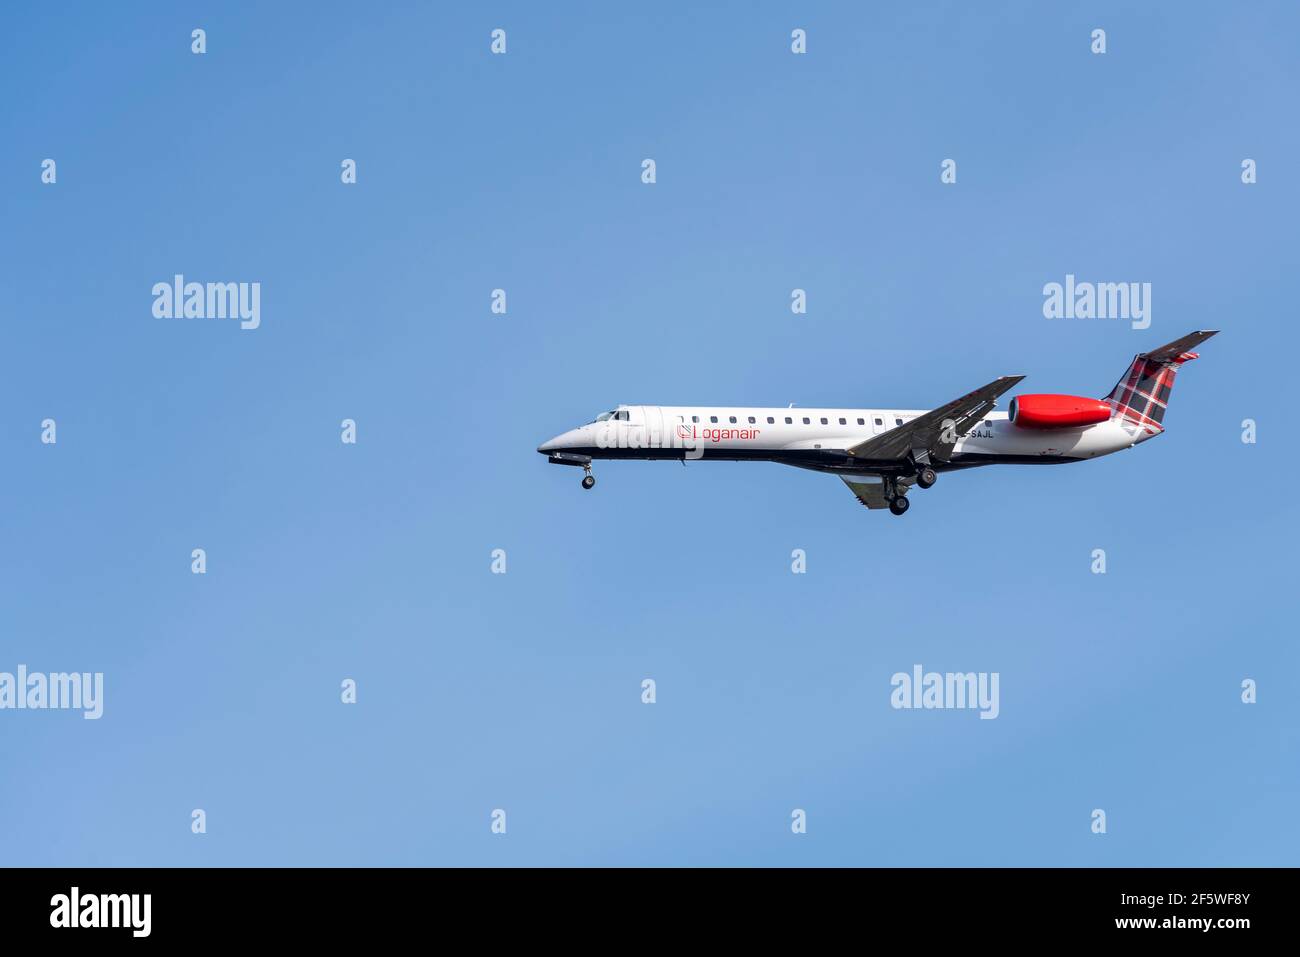 Loganair Embraer ERJ 145 jet airliner plane G-SAJL on finals to land at  London Heathrow Airport, UK, in blue sky. Scottish airline Stock Photo -  Alamy